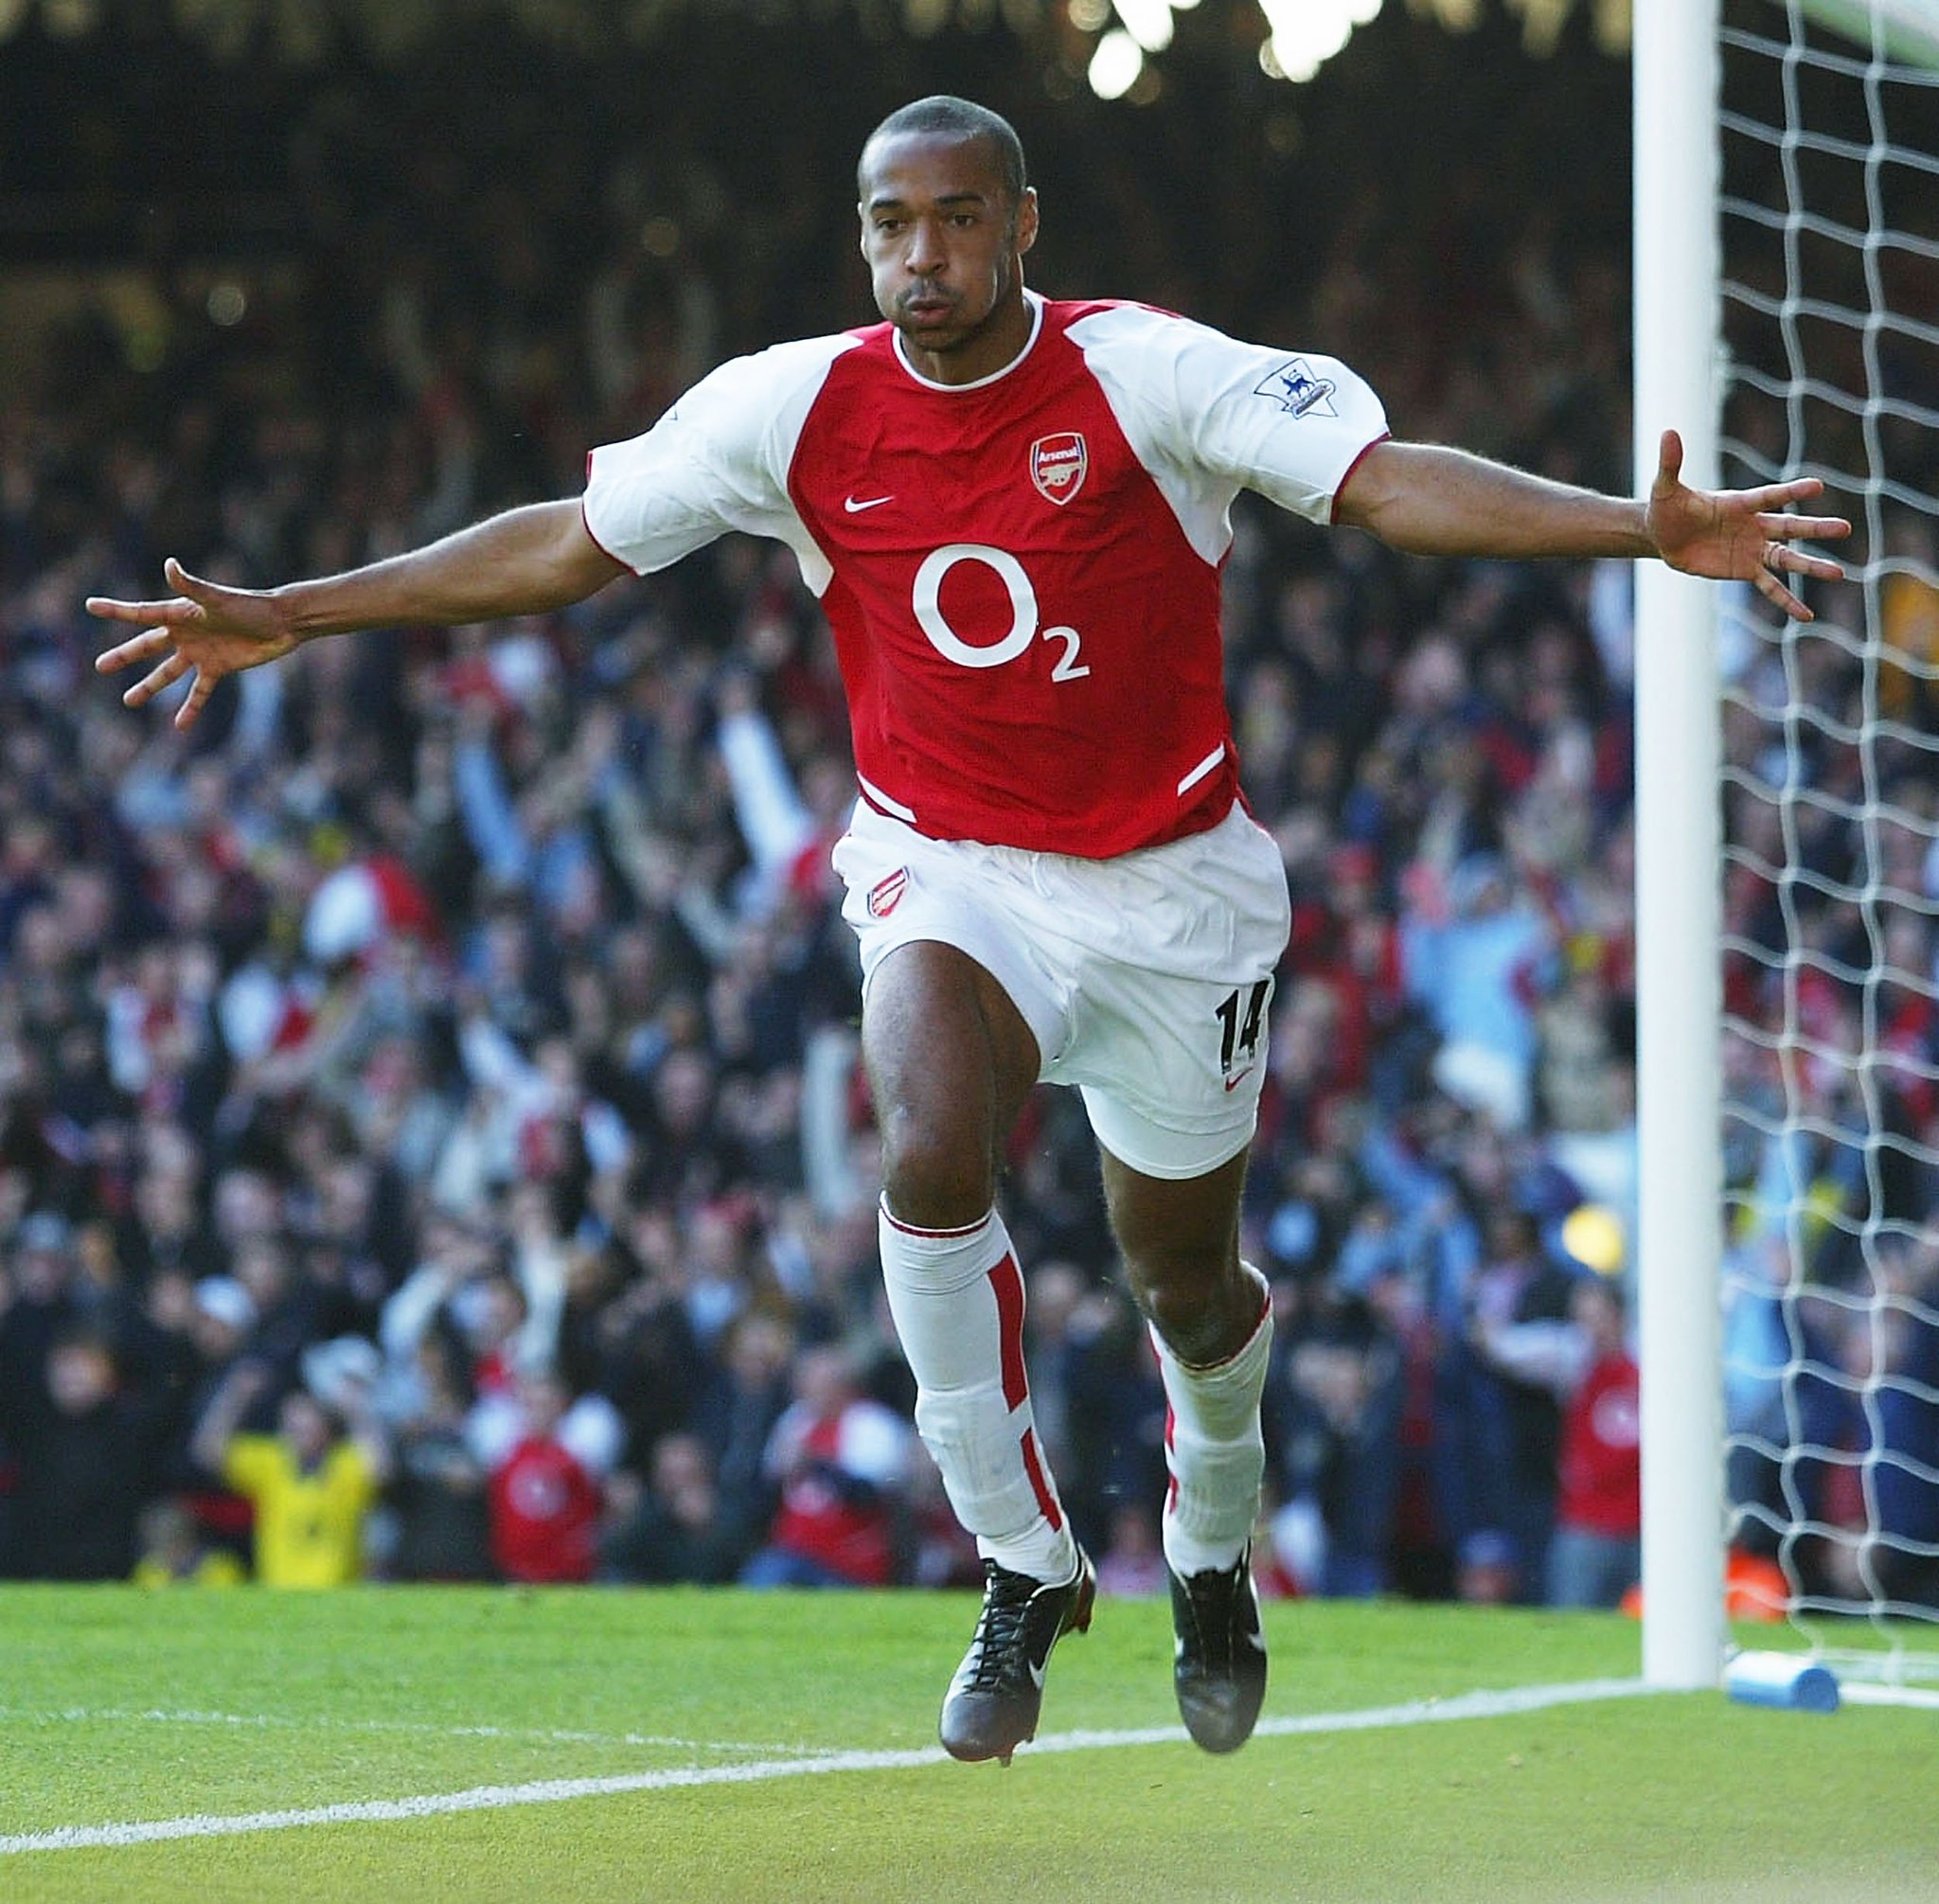  Wishing one of the greatest strikers of all-time, Thierry Henry, a very happy 40th birthday! 